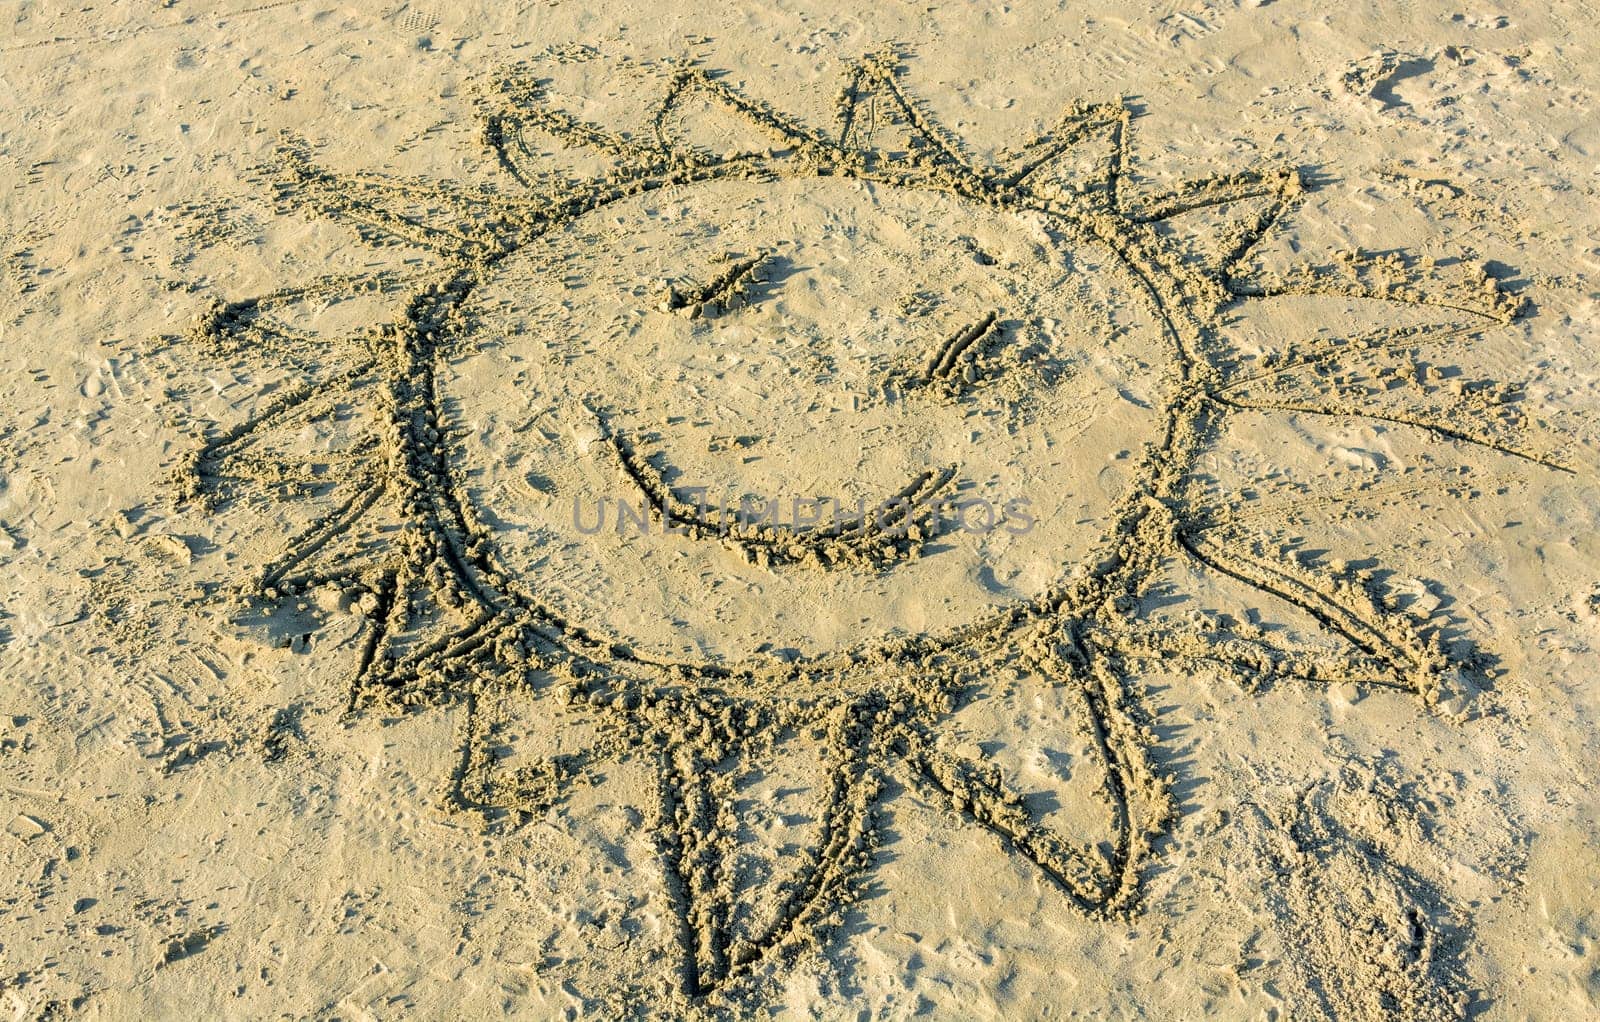 Child's drawing of smiling sun on yellow sand by Imagenet